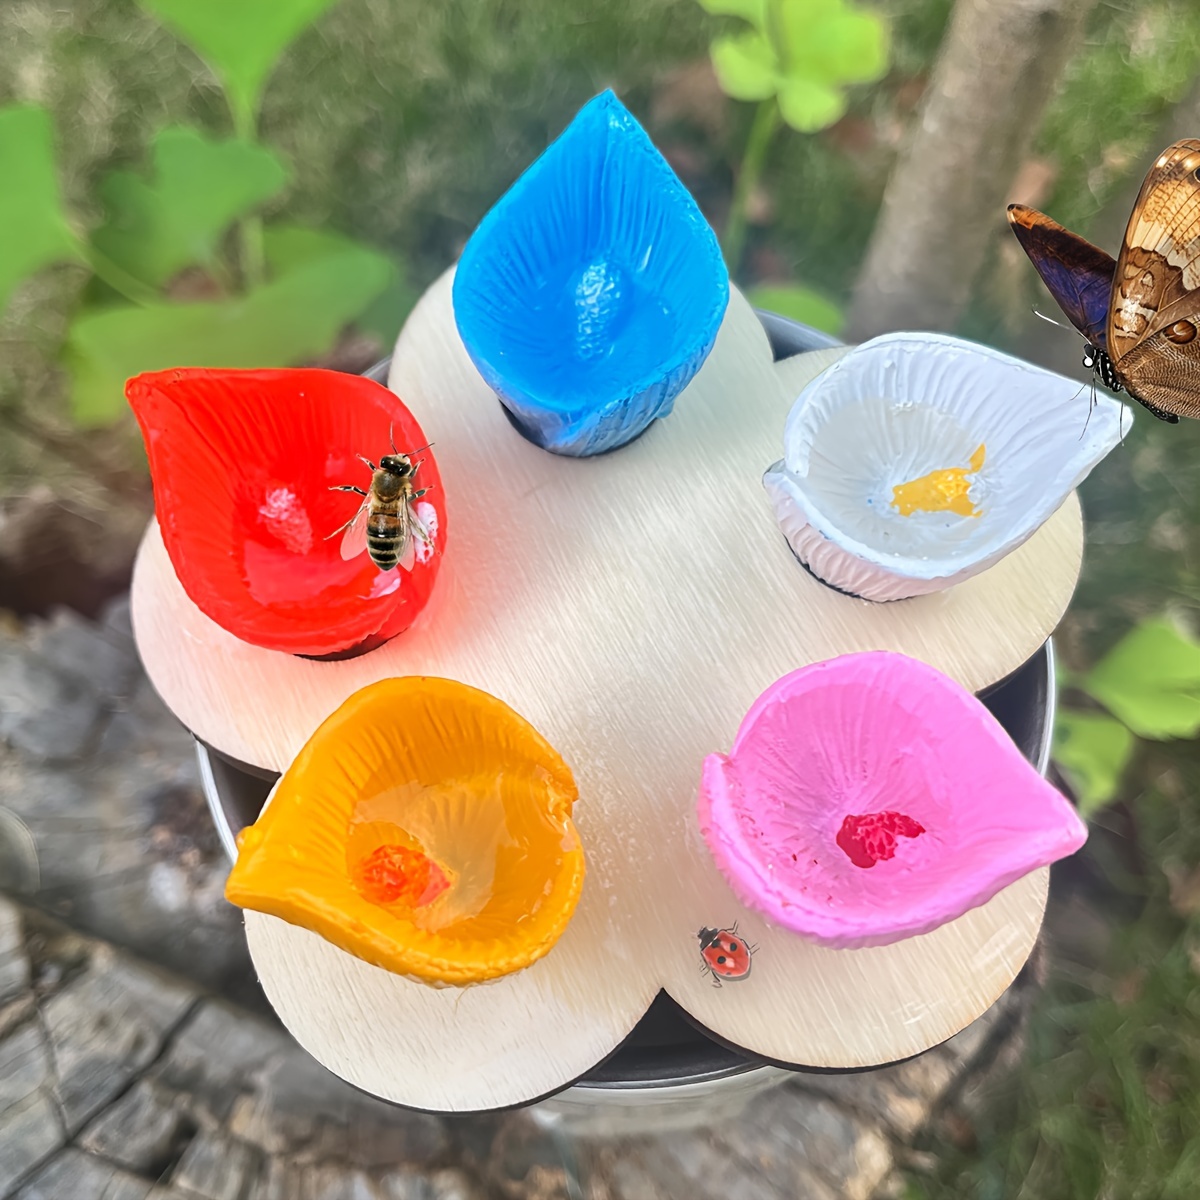 

6-piece Bee & Insect Water Feeder Set - Resin Calla Lily Flowers With Wooden Stand For Garden, Patio, And Yard - No Battery Needed, Perfect For Birds, Bees, And Small Critters